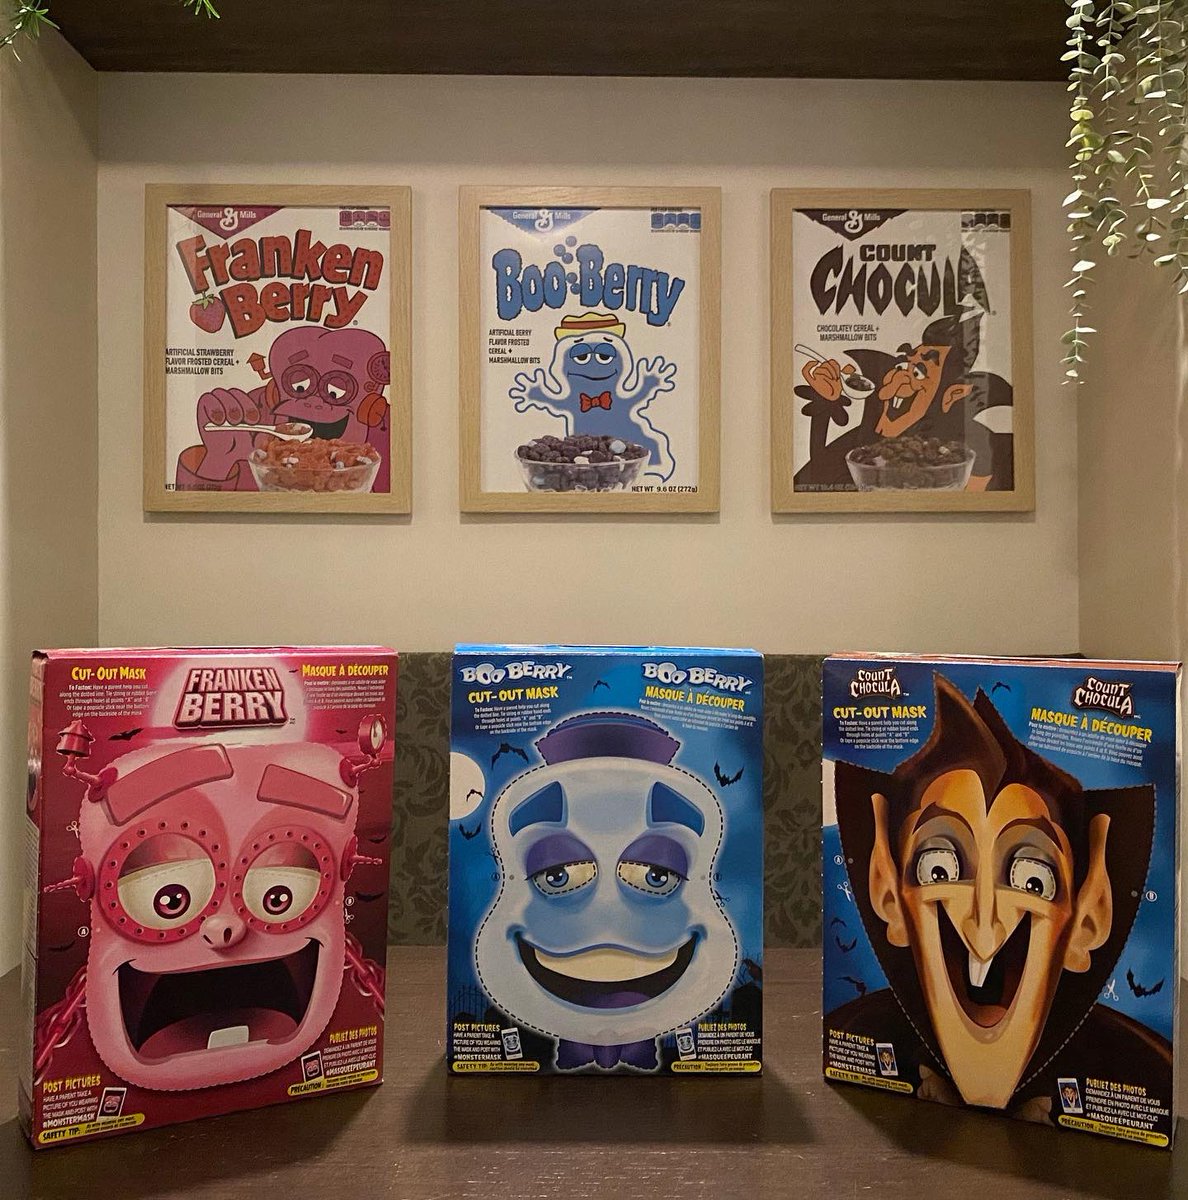 You can have your pumpkin spice whatever ya want. But it’s not really fall until I have my Monster Cereal. And this year they have cut out monster masks ! #FrankenBerry #BooBerry #CountChocula #MonsterCereal #MonsterMask